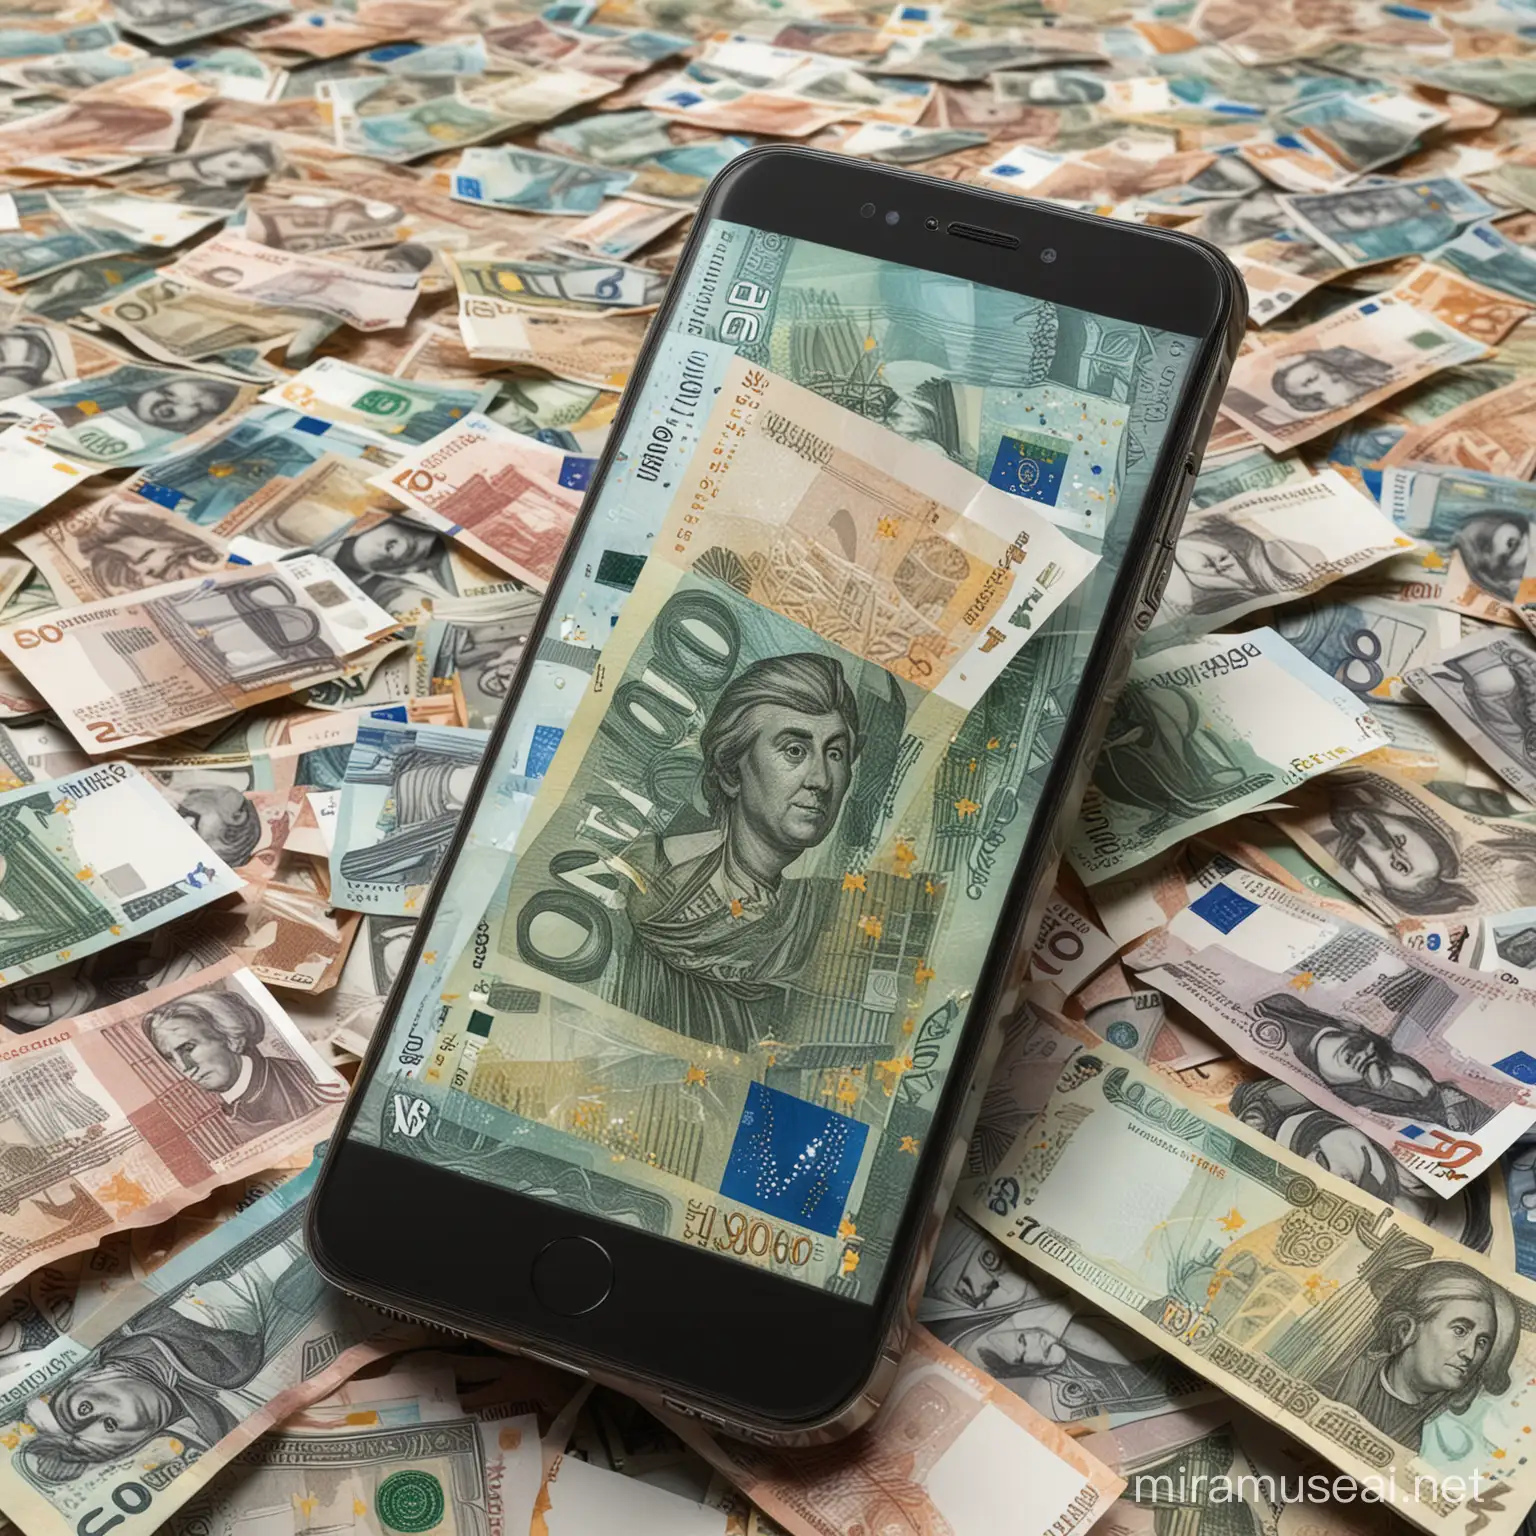 Imagine a modern smartphone, sleek and sophisticated, with a screen displaying a hyperrealistic image of Euro currency notes. The notes appear to be coming out of the screen, creating the illusion that the money is tangible and can be taken from the phone. The smartphone is tilted slightly backward, giving the impression that the currency is spilling out towards the viewer in a visually captivating display. The Euro currency notes, in various denominations, are clearly visible and fanned out for maximum visual impact. Each note is meticulously detailed, capturing the intricate patterns and textures of real currency, further enhancing the hyperrealistic quality of the illustration. The combination of the cutting-edge technology of the smartphone and the traditional symbol of wealth represented by the Euro notes creates a compelling juxtaposition of modernity and financial abundance. The neutral background serves to keep the focus on the smartphone and the currency, allowing the viewer to fully appreciate the intricate details and visual effects of the scene. Rendered in stunning 32k resolution, this hyperrealistic illustration immerses the viewer in a world where technology and wealth converge, offering a visually captivating depiction of modern financial aspirations and digital abundance.